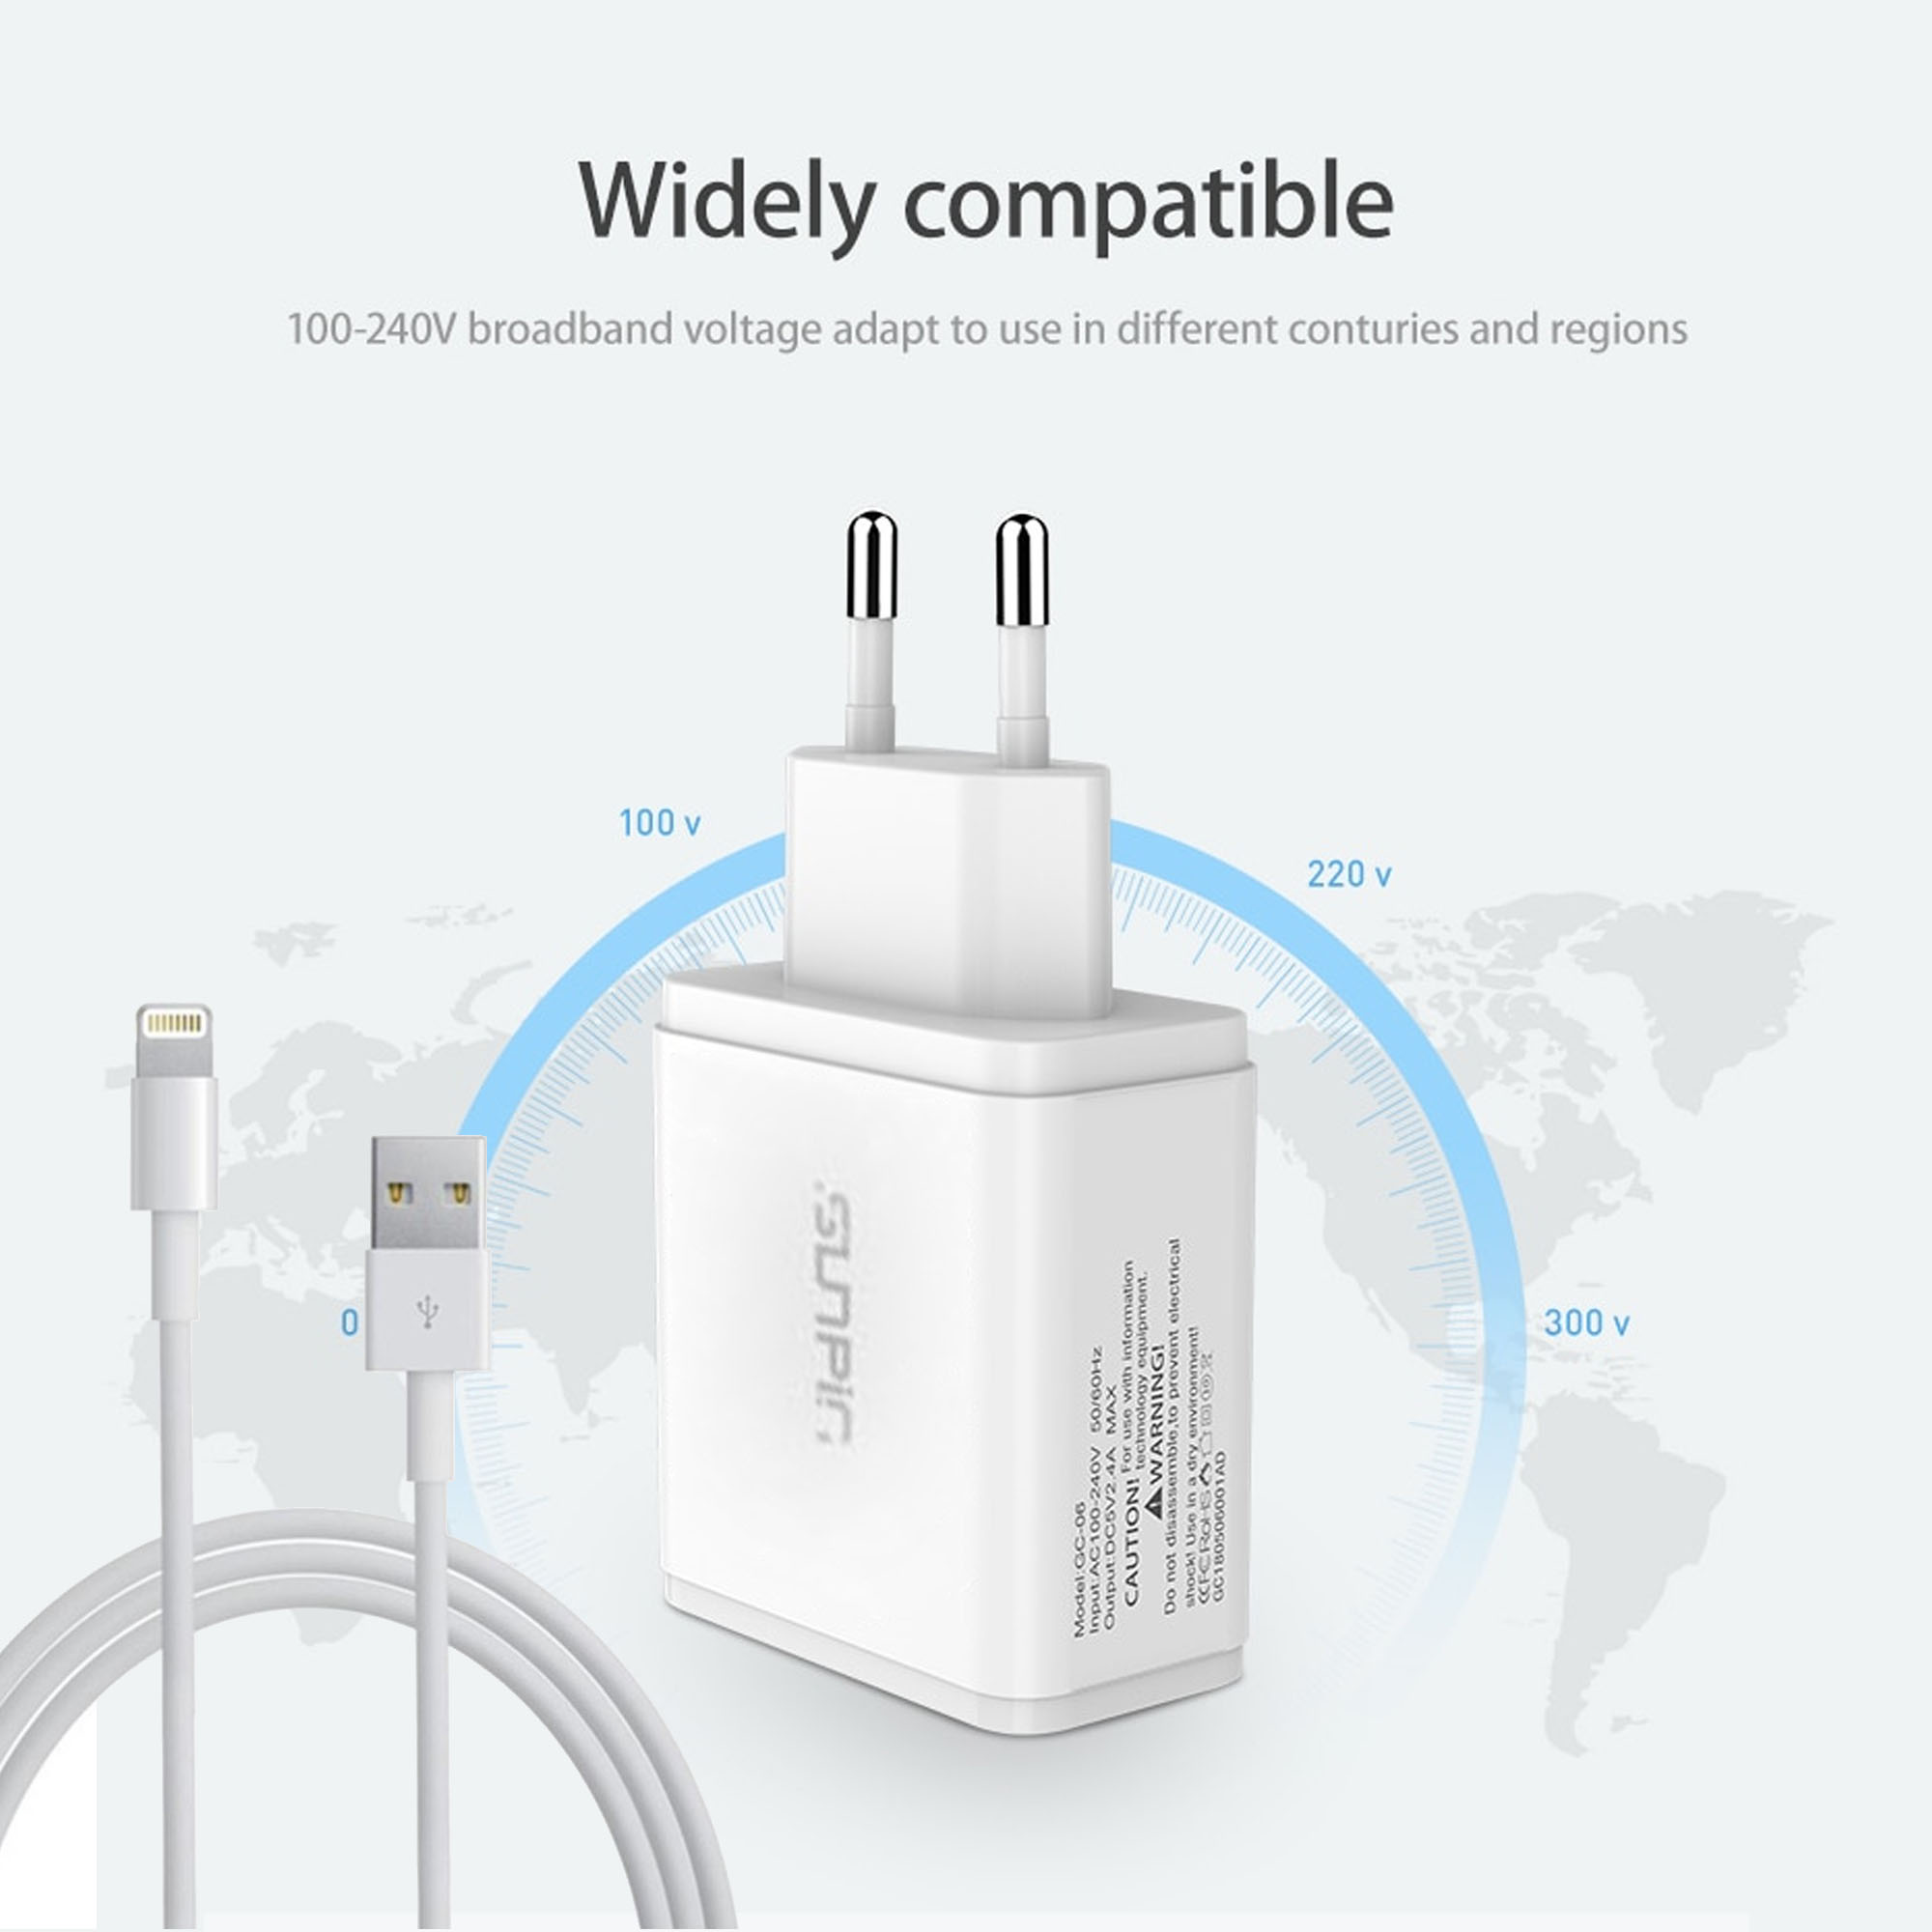 SUNPIN+SP21+Iphone+usb+Fast+USB+Charger+For+Phone+Dual+Ports+Phone+Charger+5V+2.4A+EU+Plug+Travel+Wall+Charger+For+iPhone+Samsung+Fast